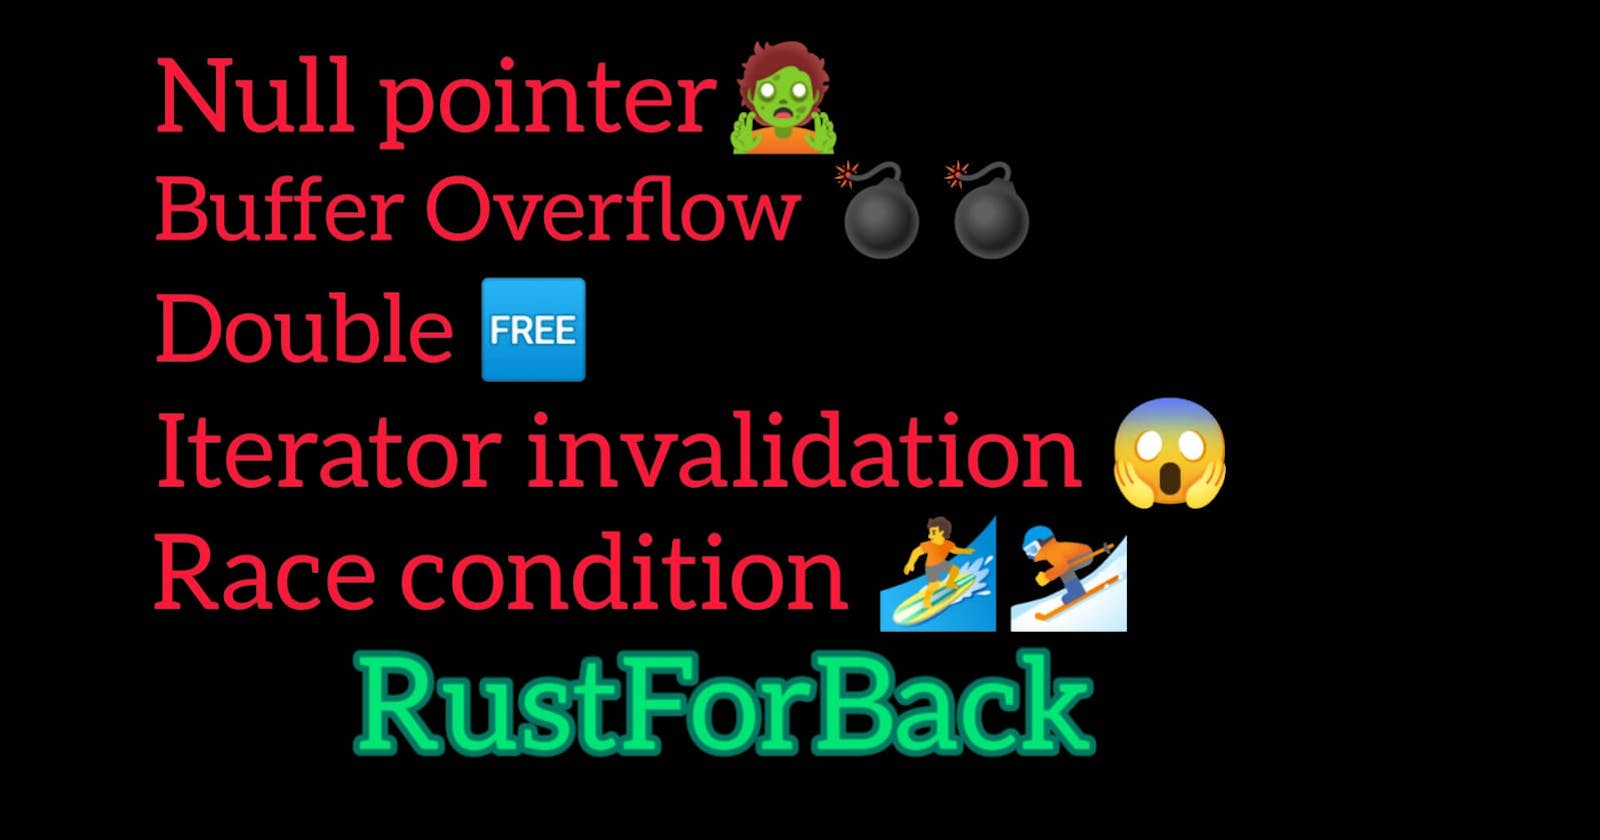 Why is Rust more reliable than C++ and even garbage-collected languages when it comes to memory safety?